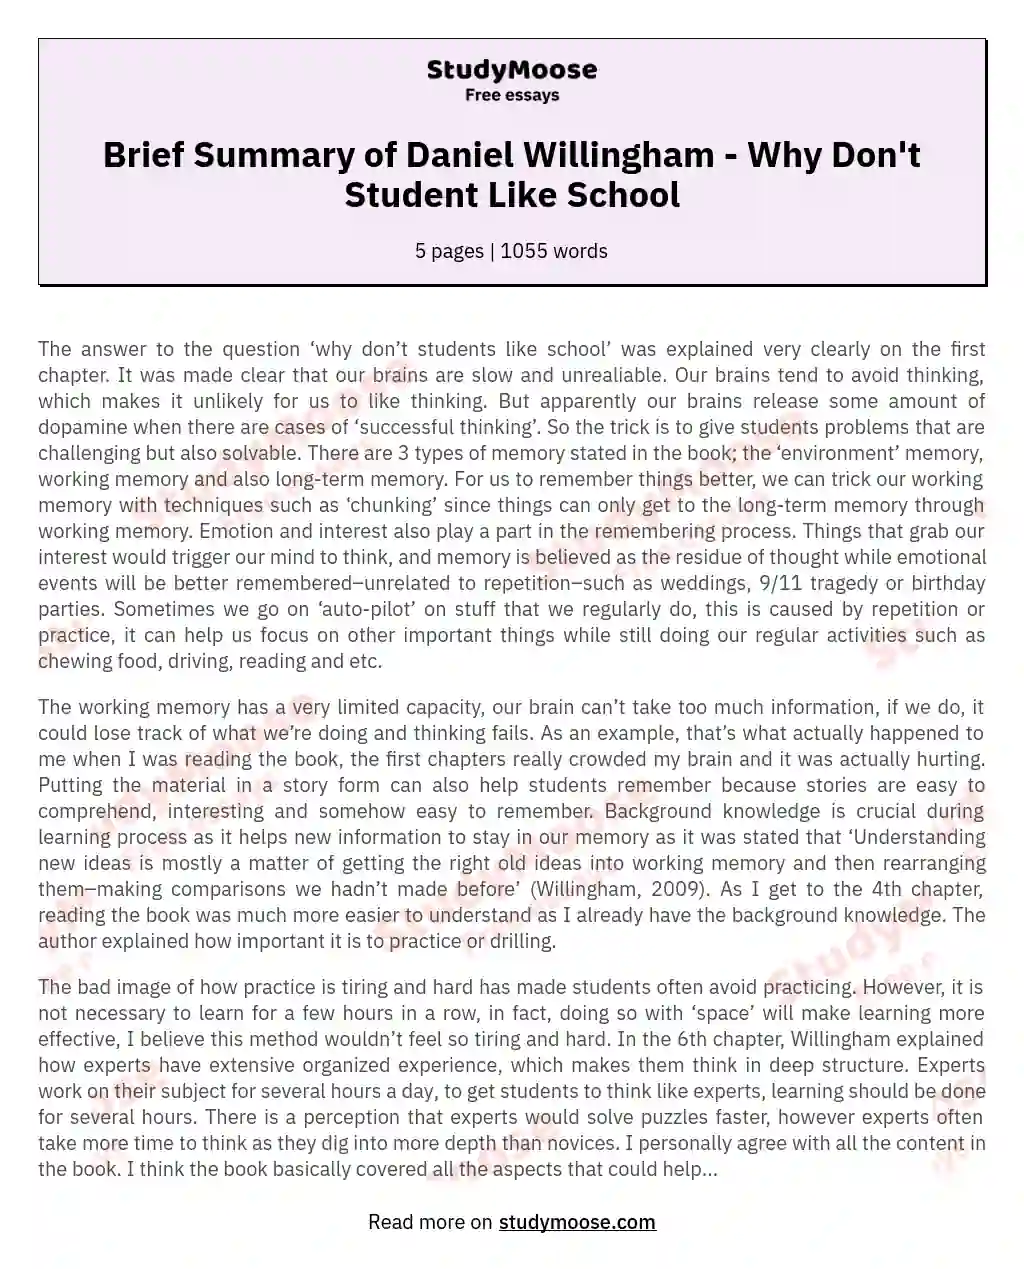 Brief Summary of Daniel Willingham - Why Don't Student Like School